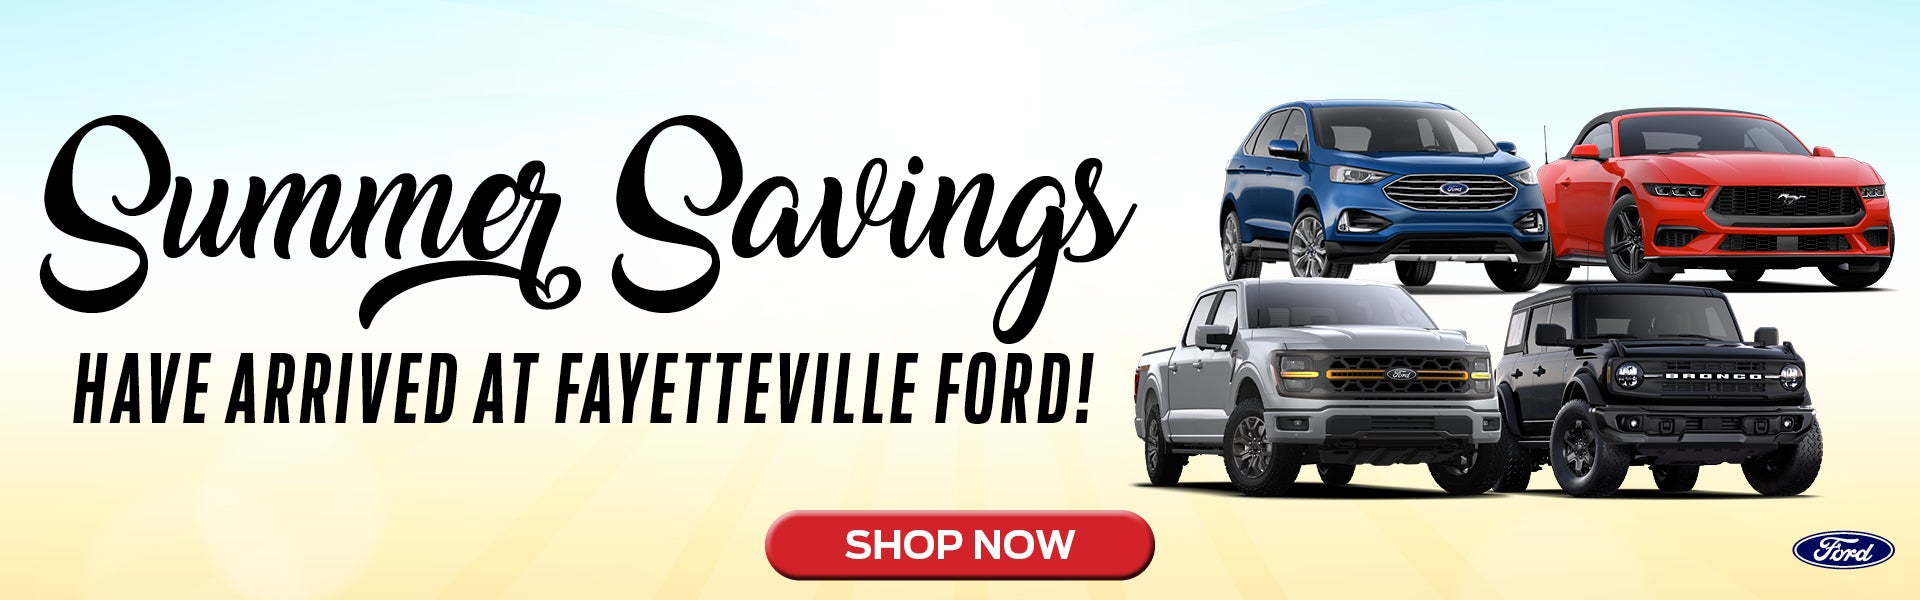 Summer Savings have arrived at Fayetteville Ford!